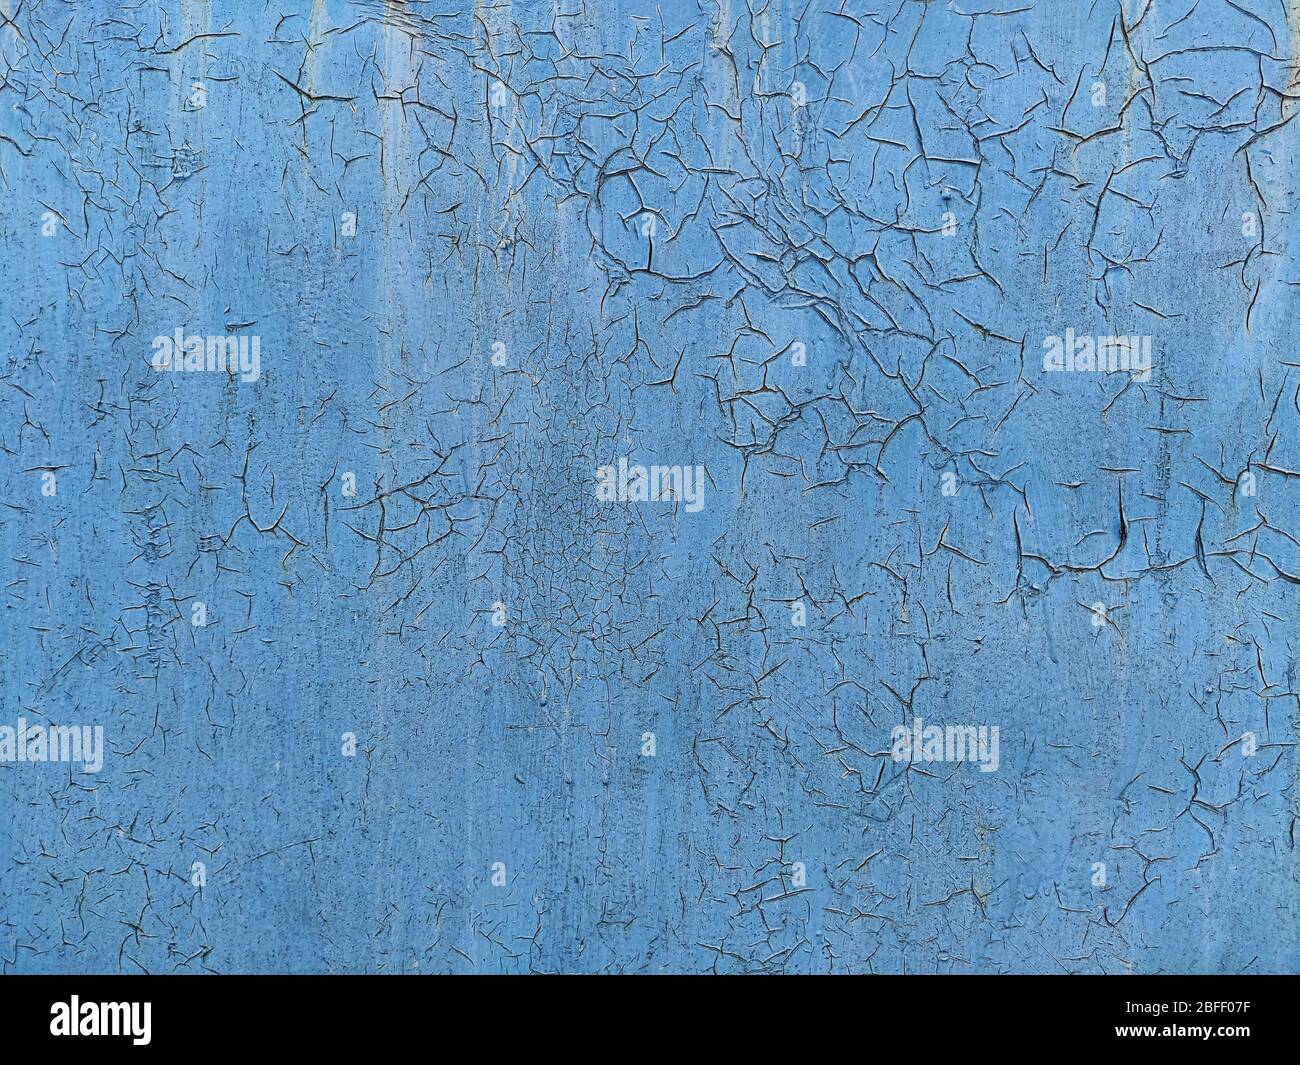 Corroded metal background. Rusted blue painted metal wall. Rusty metal background with streaks of rust. Rust stains. The metal surface rusted spots. R Stock Photo